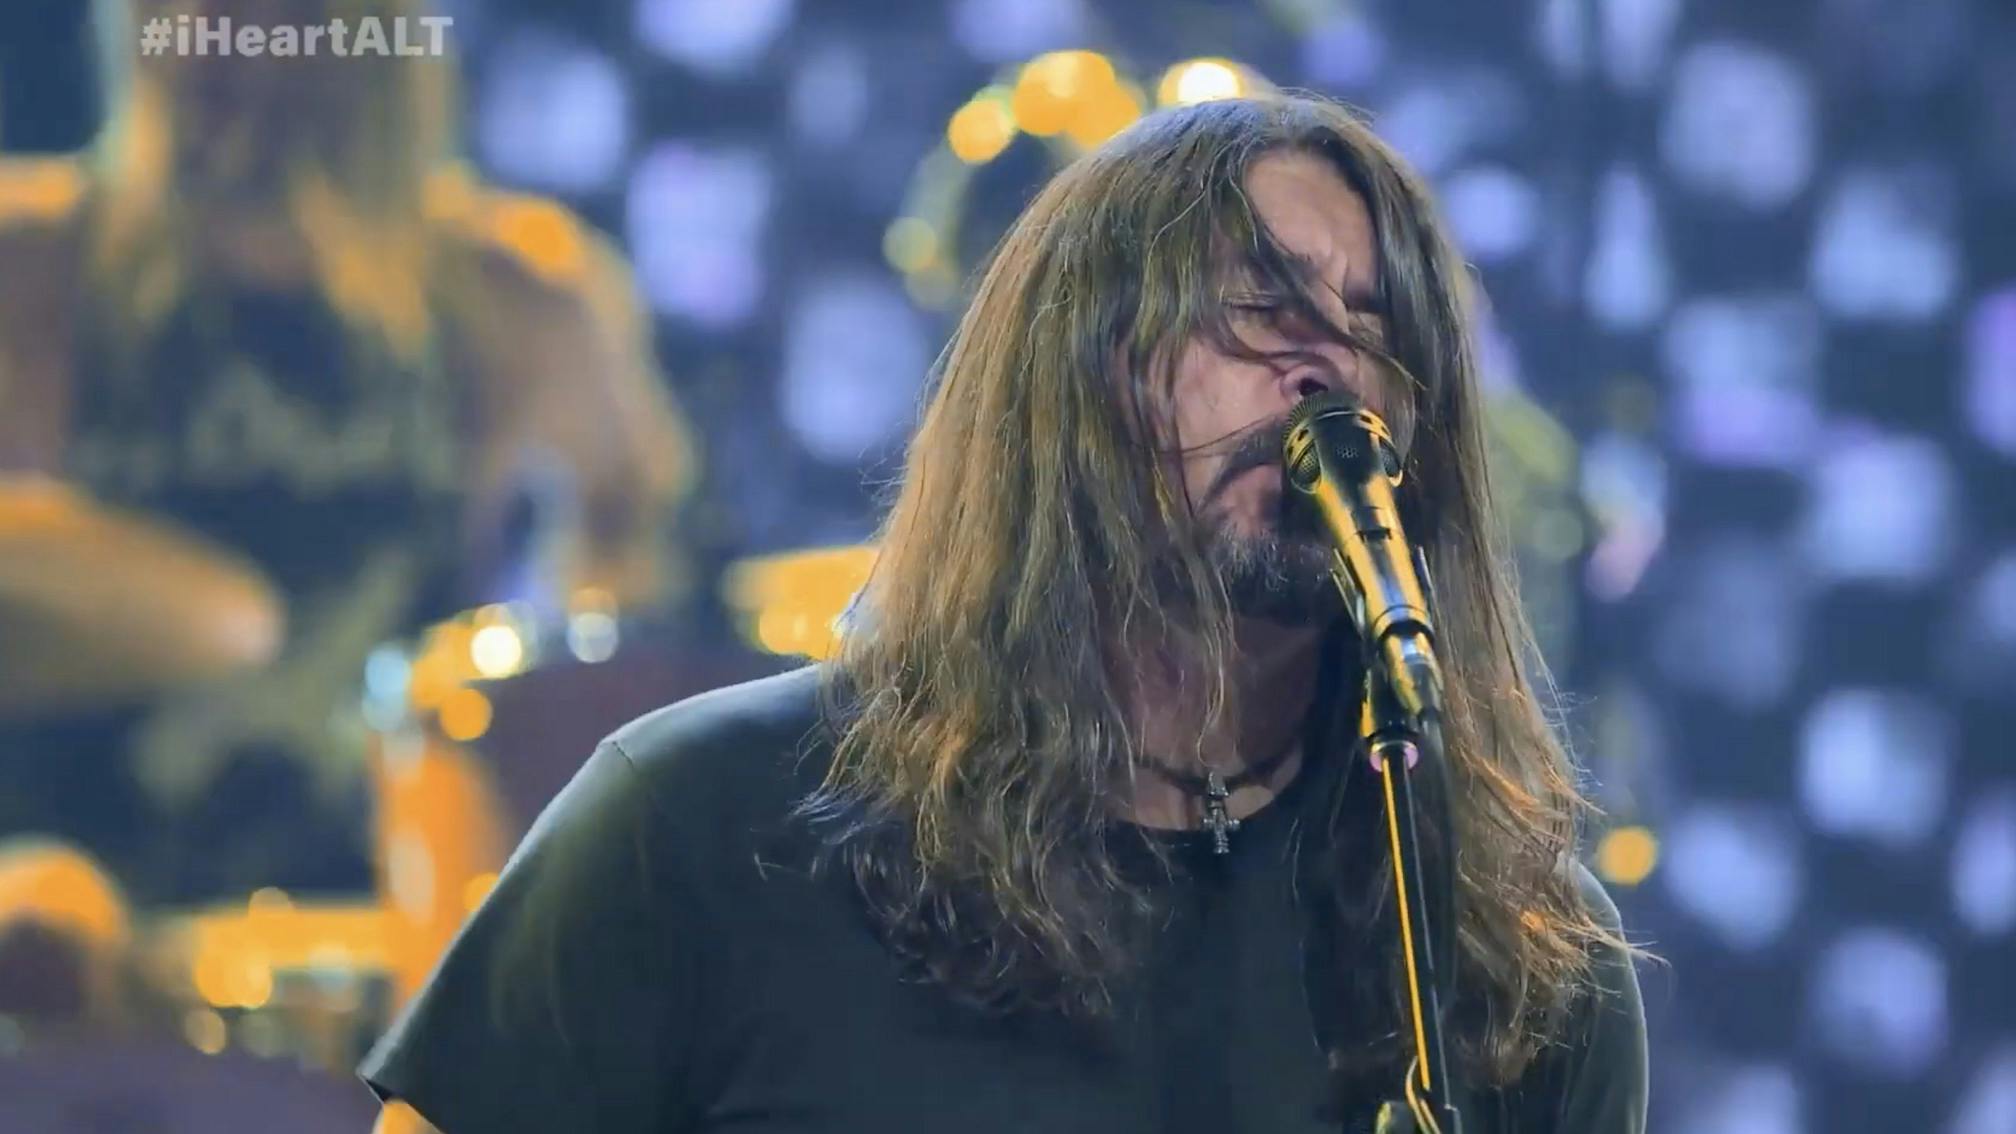 Watch Foo Fighters perform Everlong at the iHeartRadio ALTer EGO concert